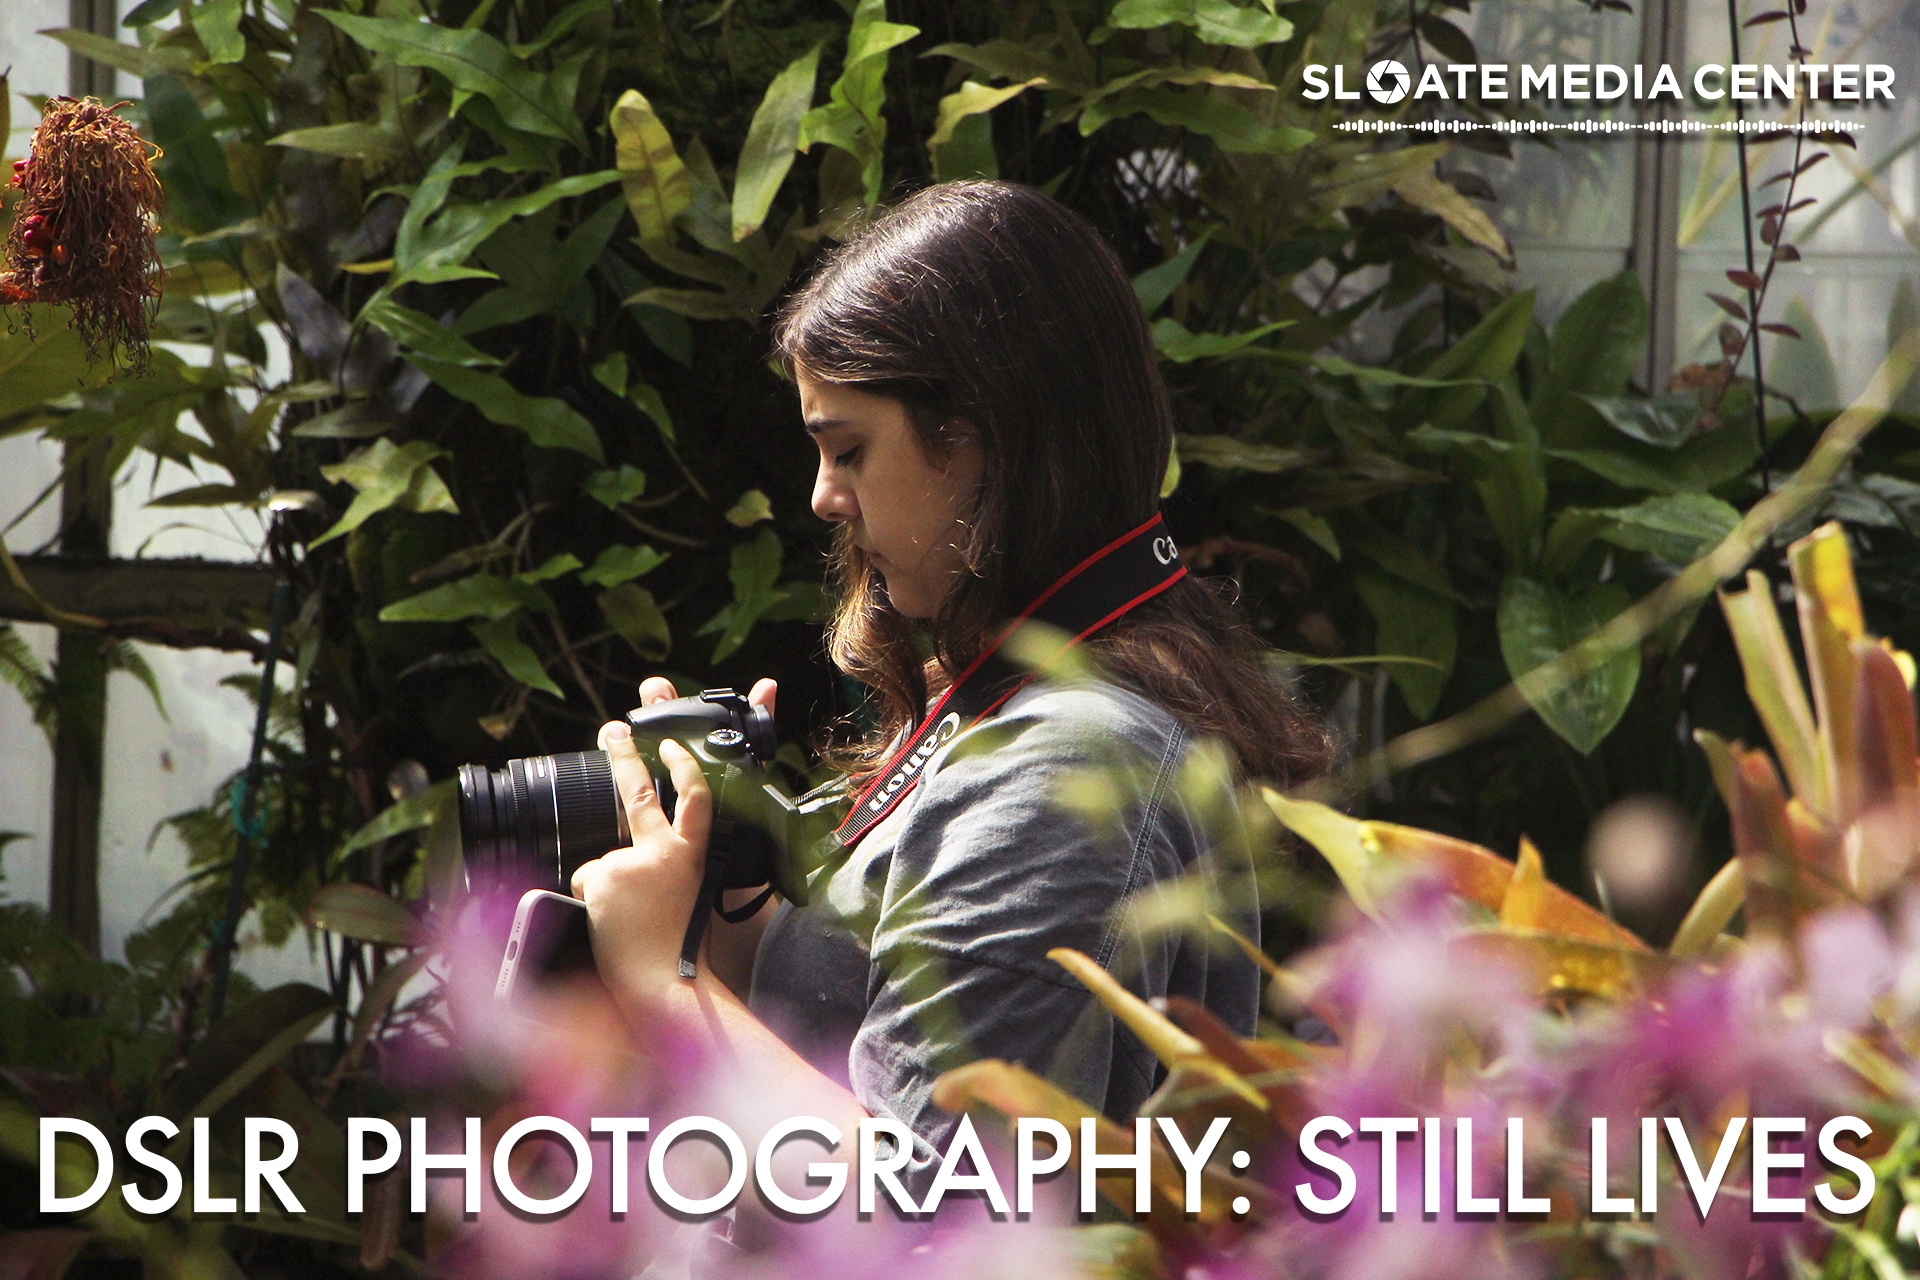 A young woman holding a dslr camera while surrounded by flowers